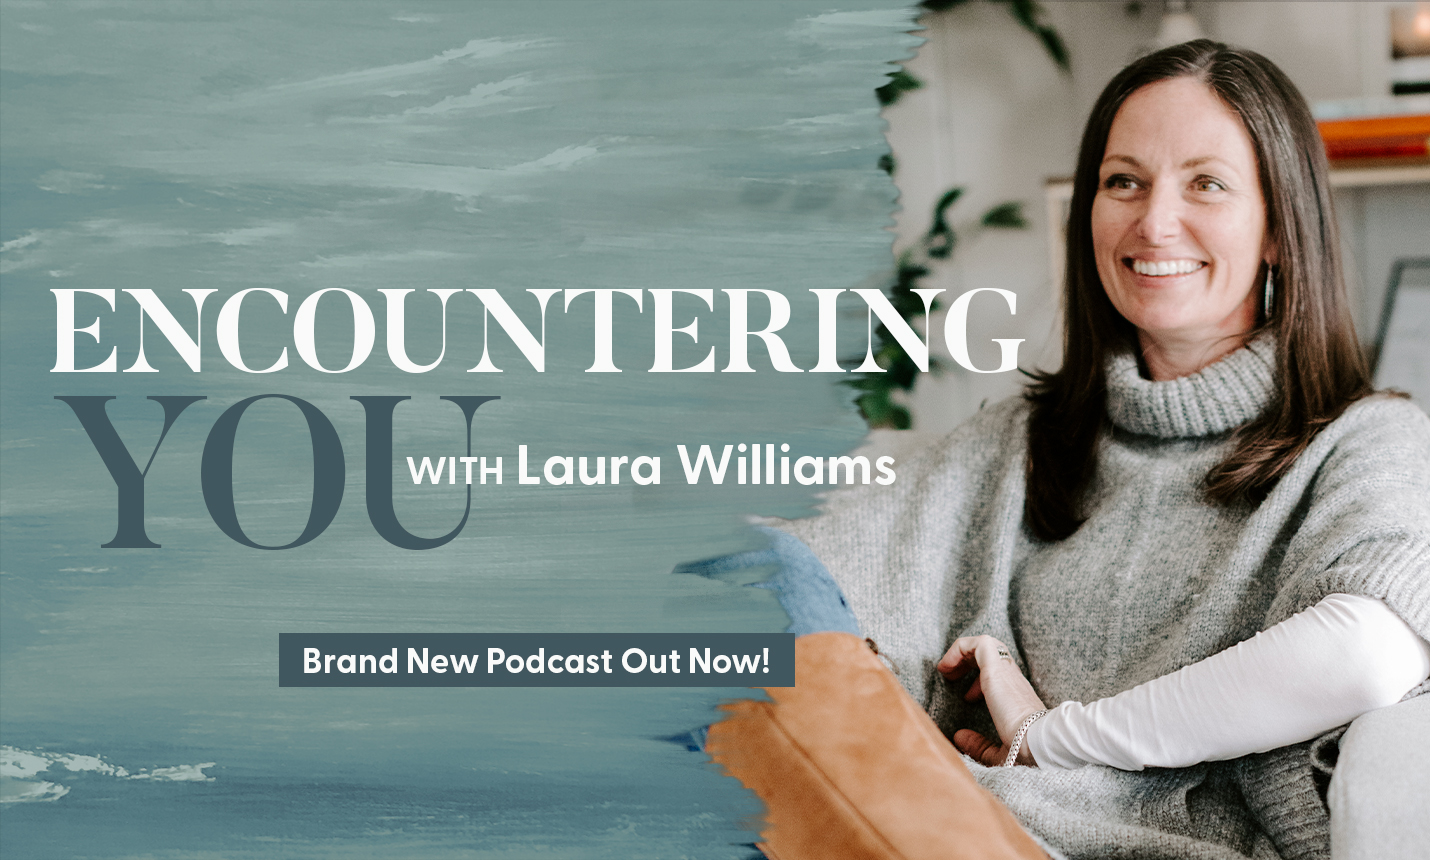 Encountering You with Laura Williams - Brand New